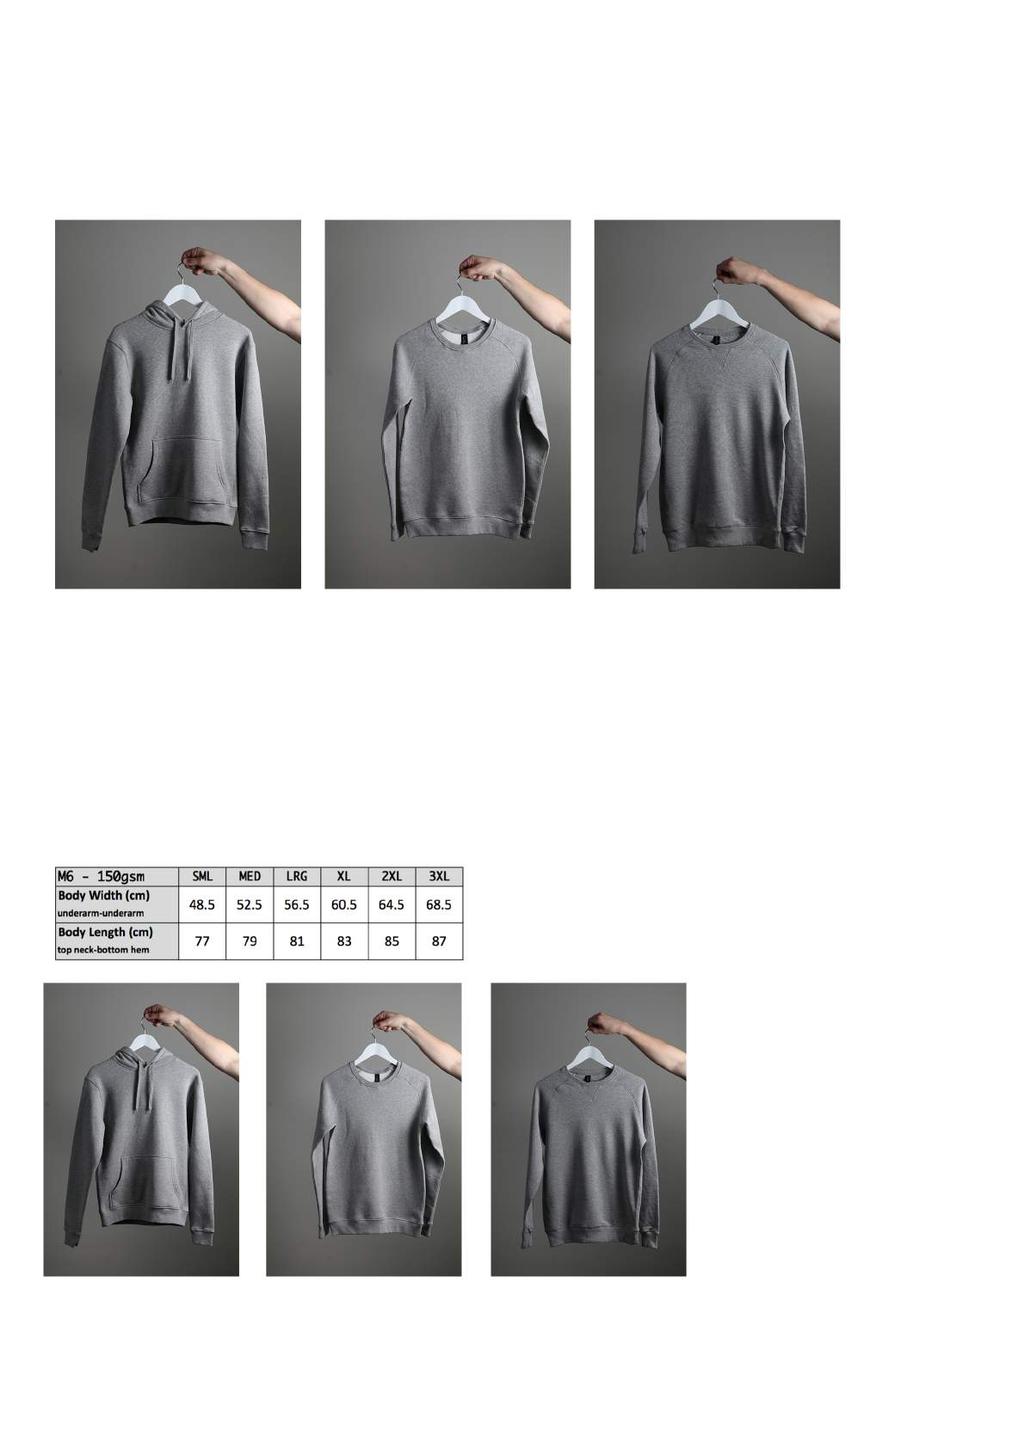 M10 - MENS BRUSHED HOODIE M11 - Mens Brushed Crew Neck M12 - Mens unbrushed crew neck The Mens Brushed Hoodie is the most comfortable hoodie on the market.